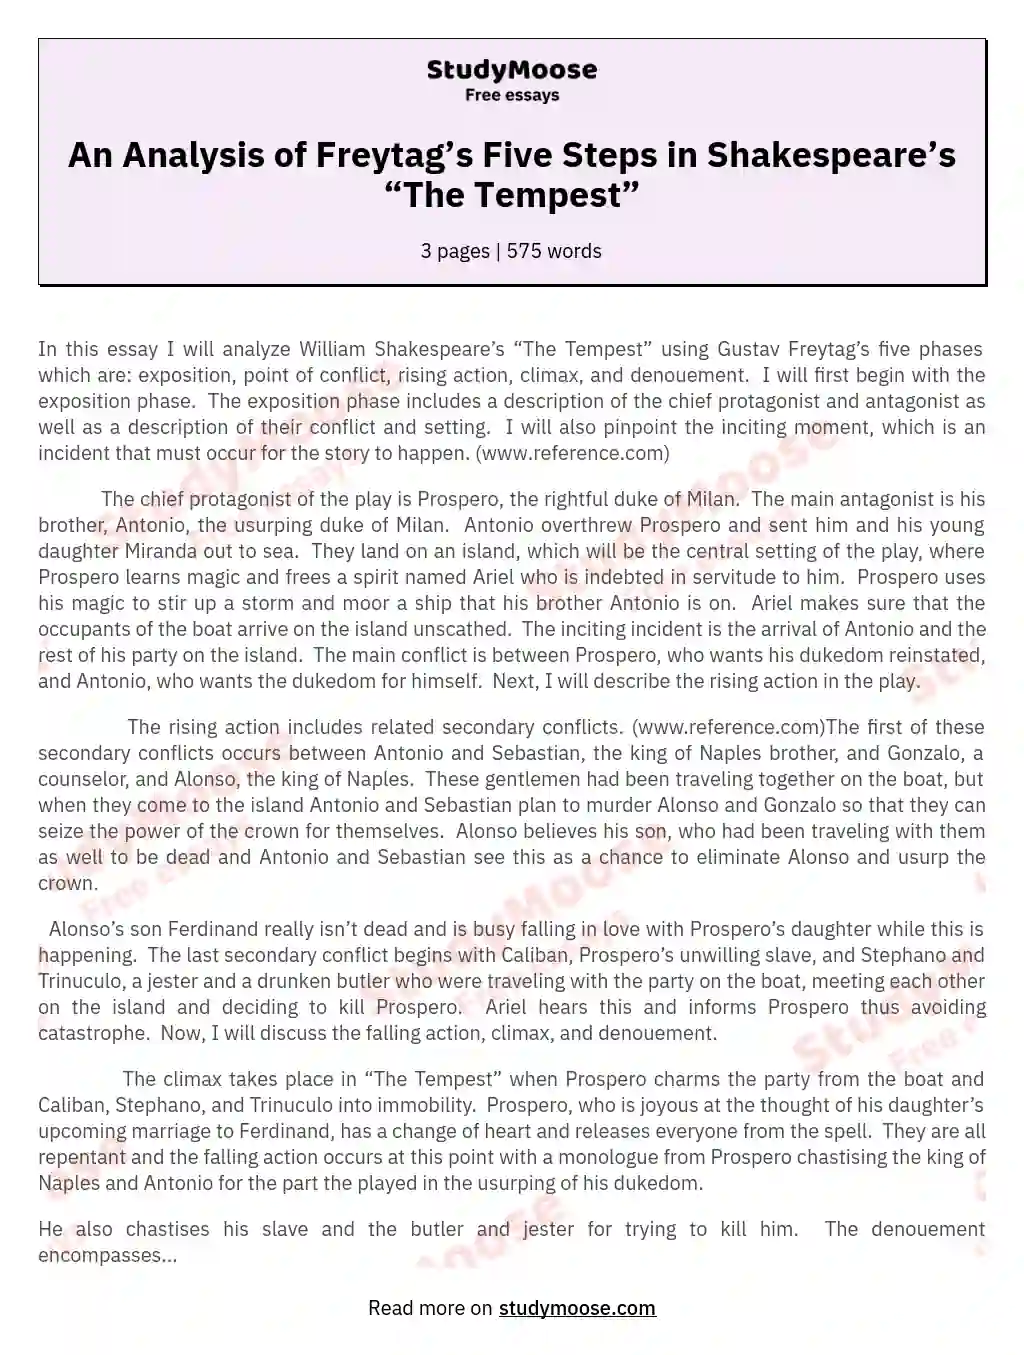 An Analysis of Freytag’s Five Steps in Shakespeare’s “The Tempest”